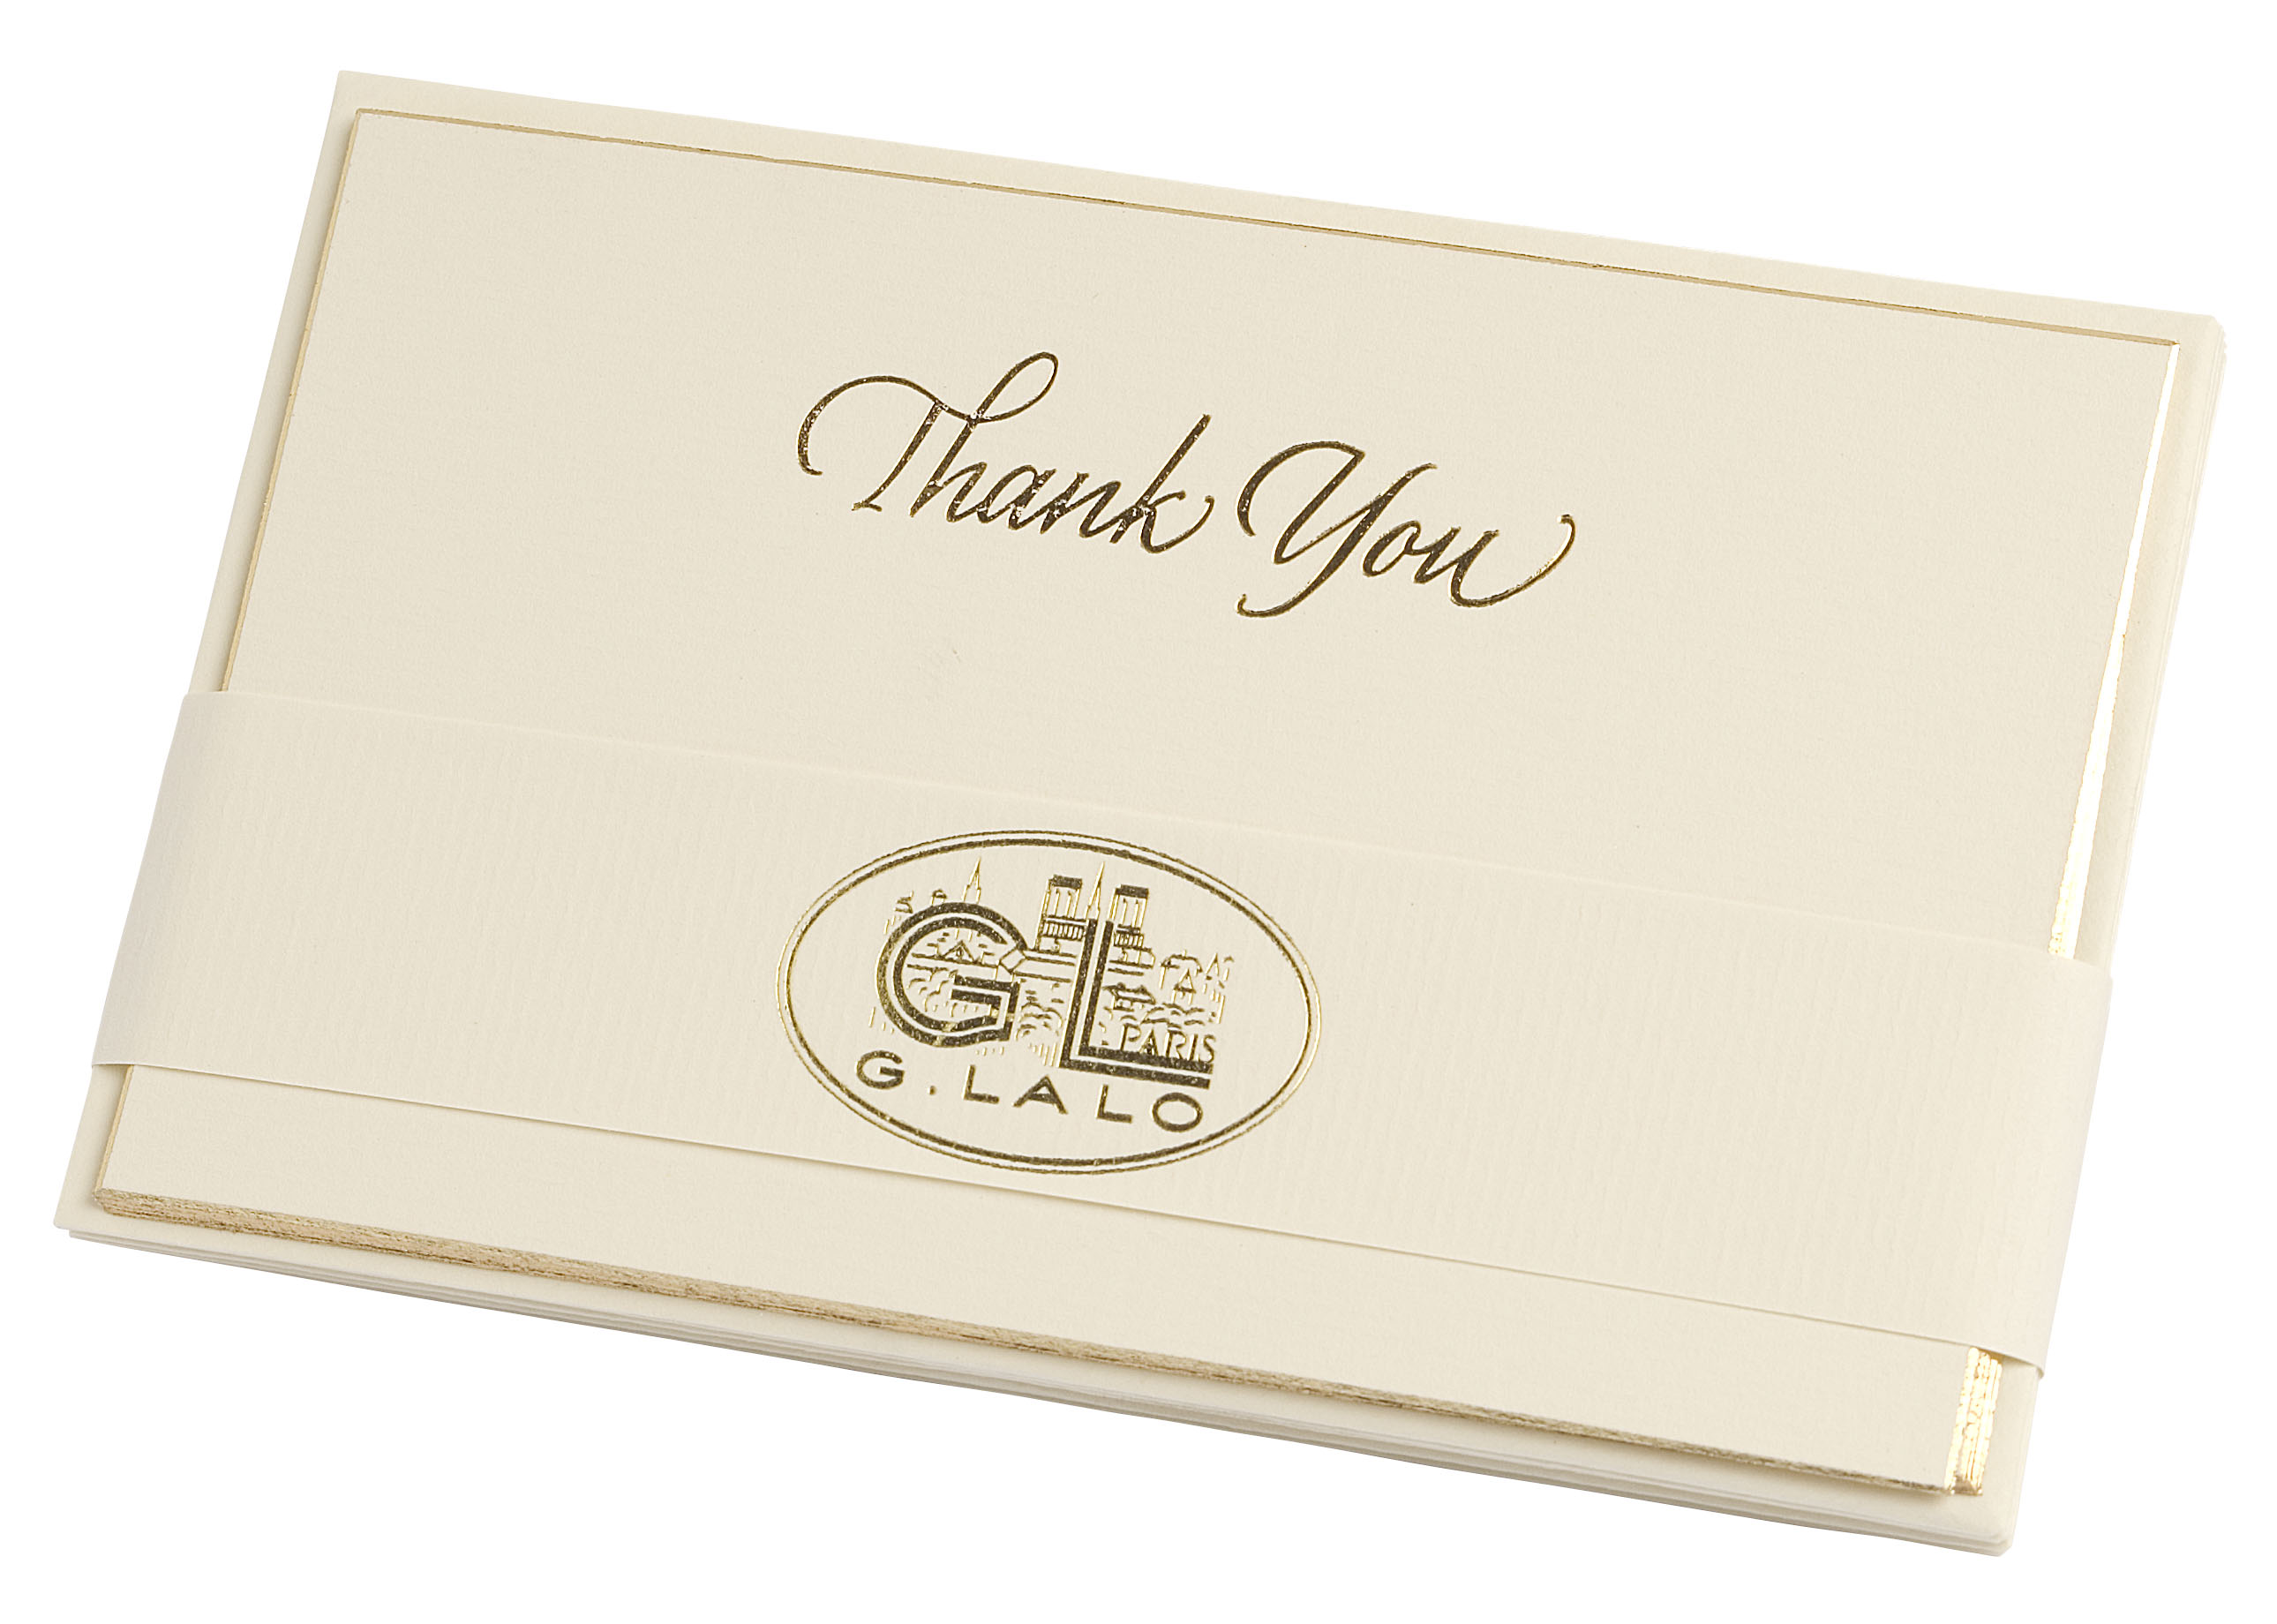 Bevel-Edged Thank You Note Cards - Show Special Net Price $2.00